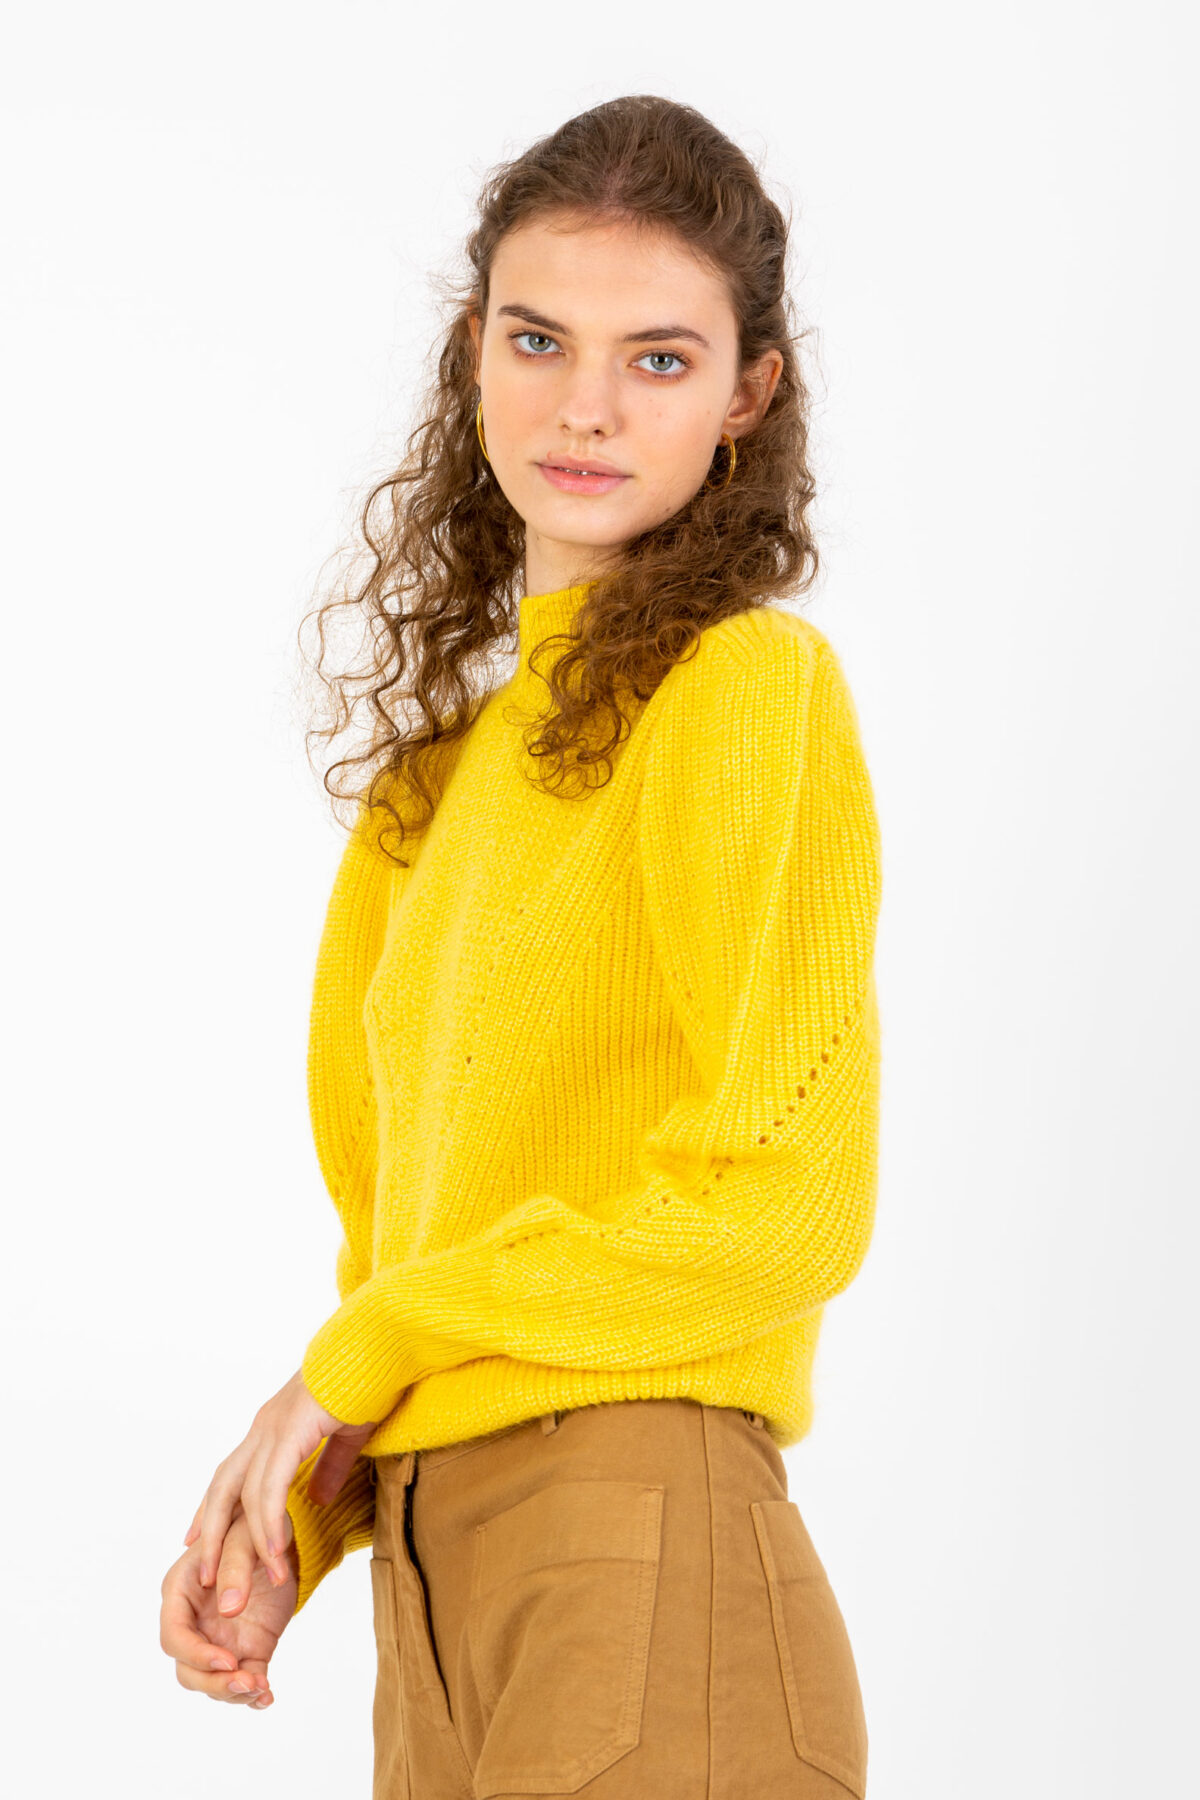 pisti-yellow-sweater-stand-collar-suncoo-recycled-polyester-matchboxathens